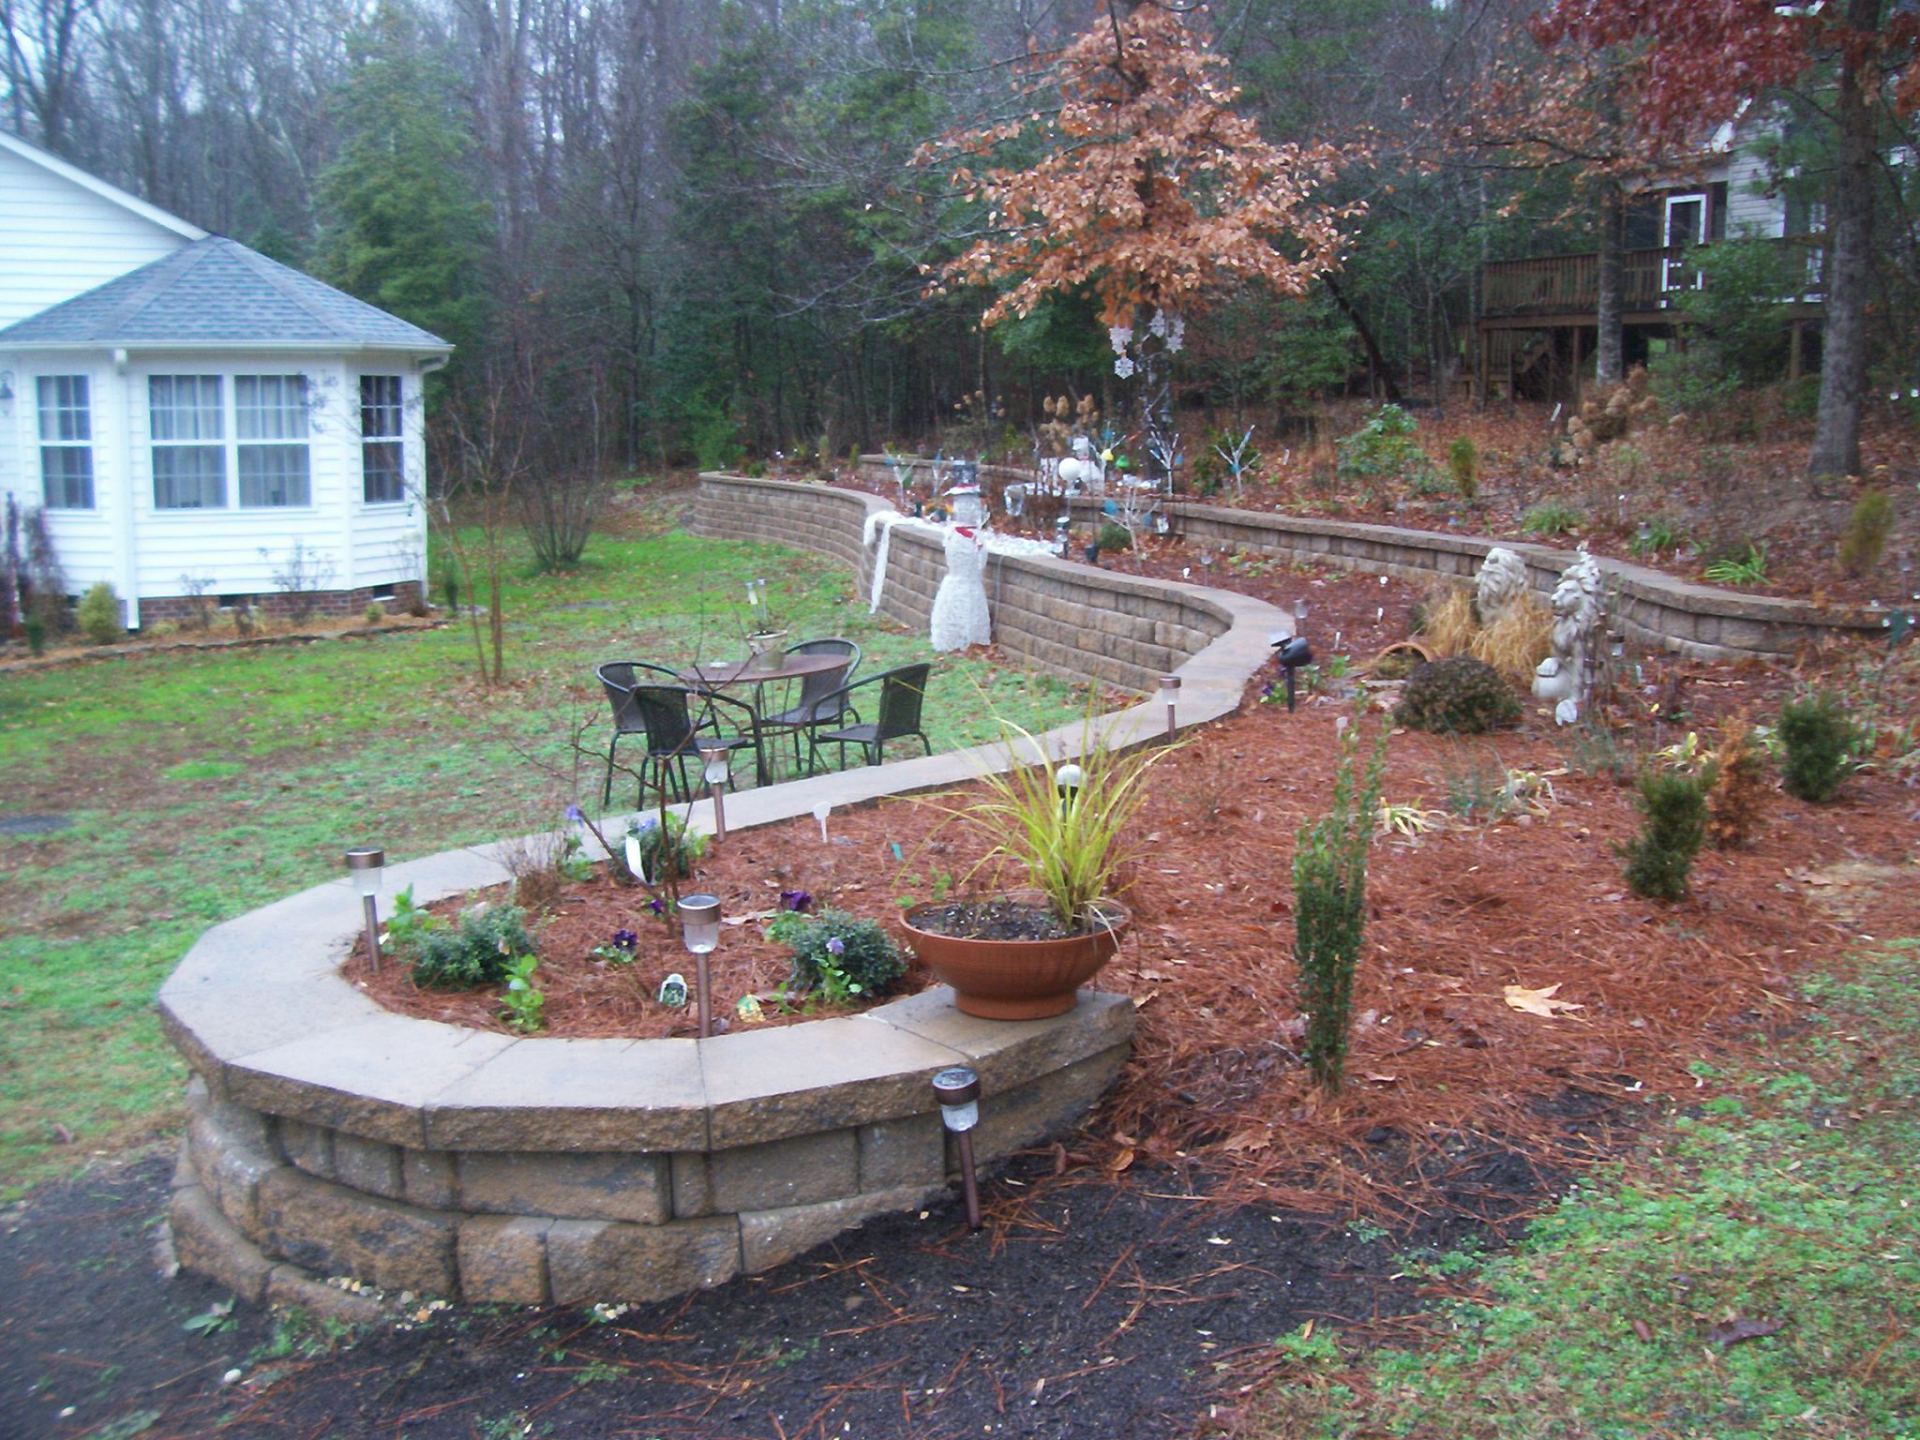 Municipal Landscape Maintenance Service — Retainer Wall With Pots And White House in Shacklefords, VA